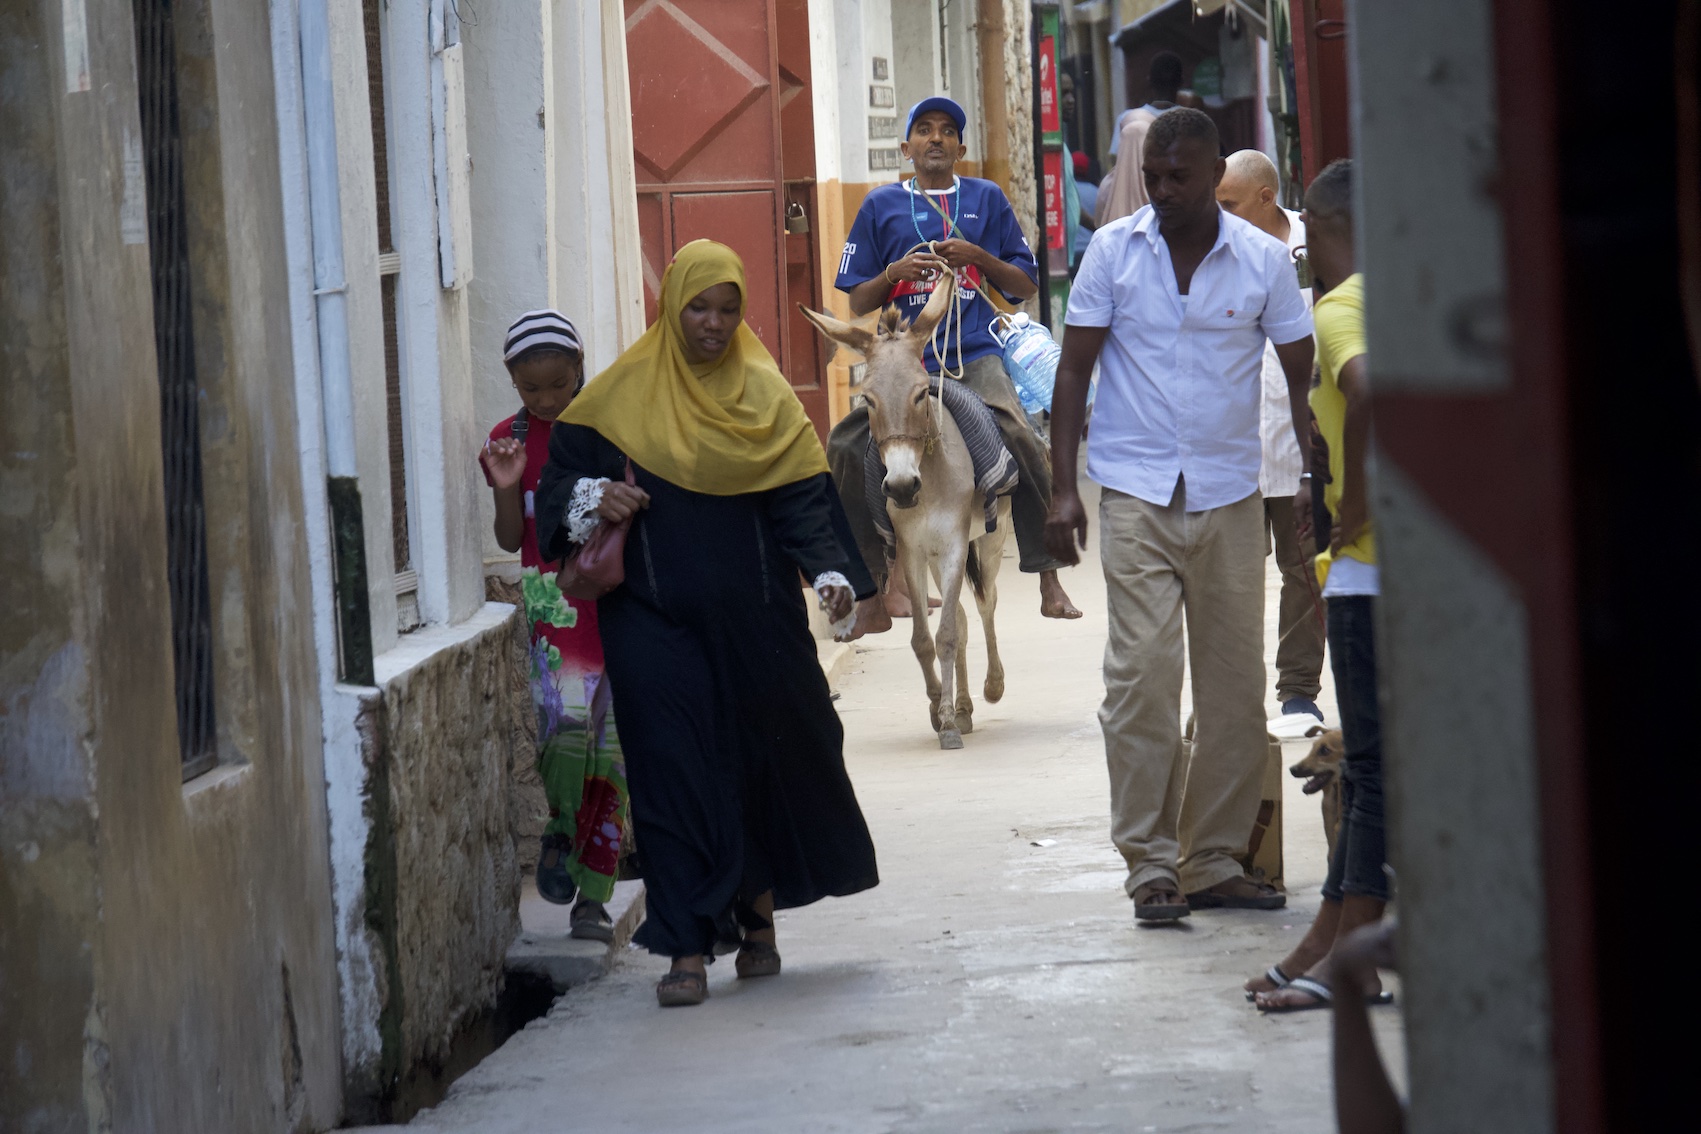 Pilar walking and a man riding a donkey in Lamu Old Town